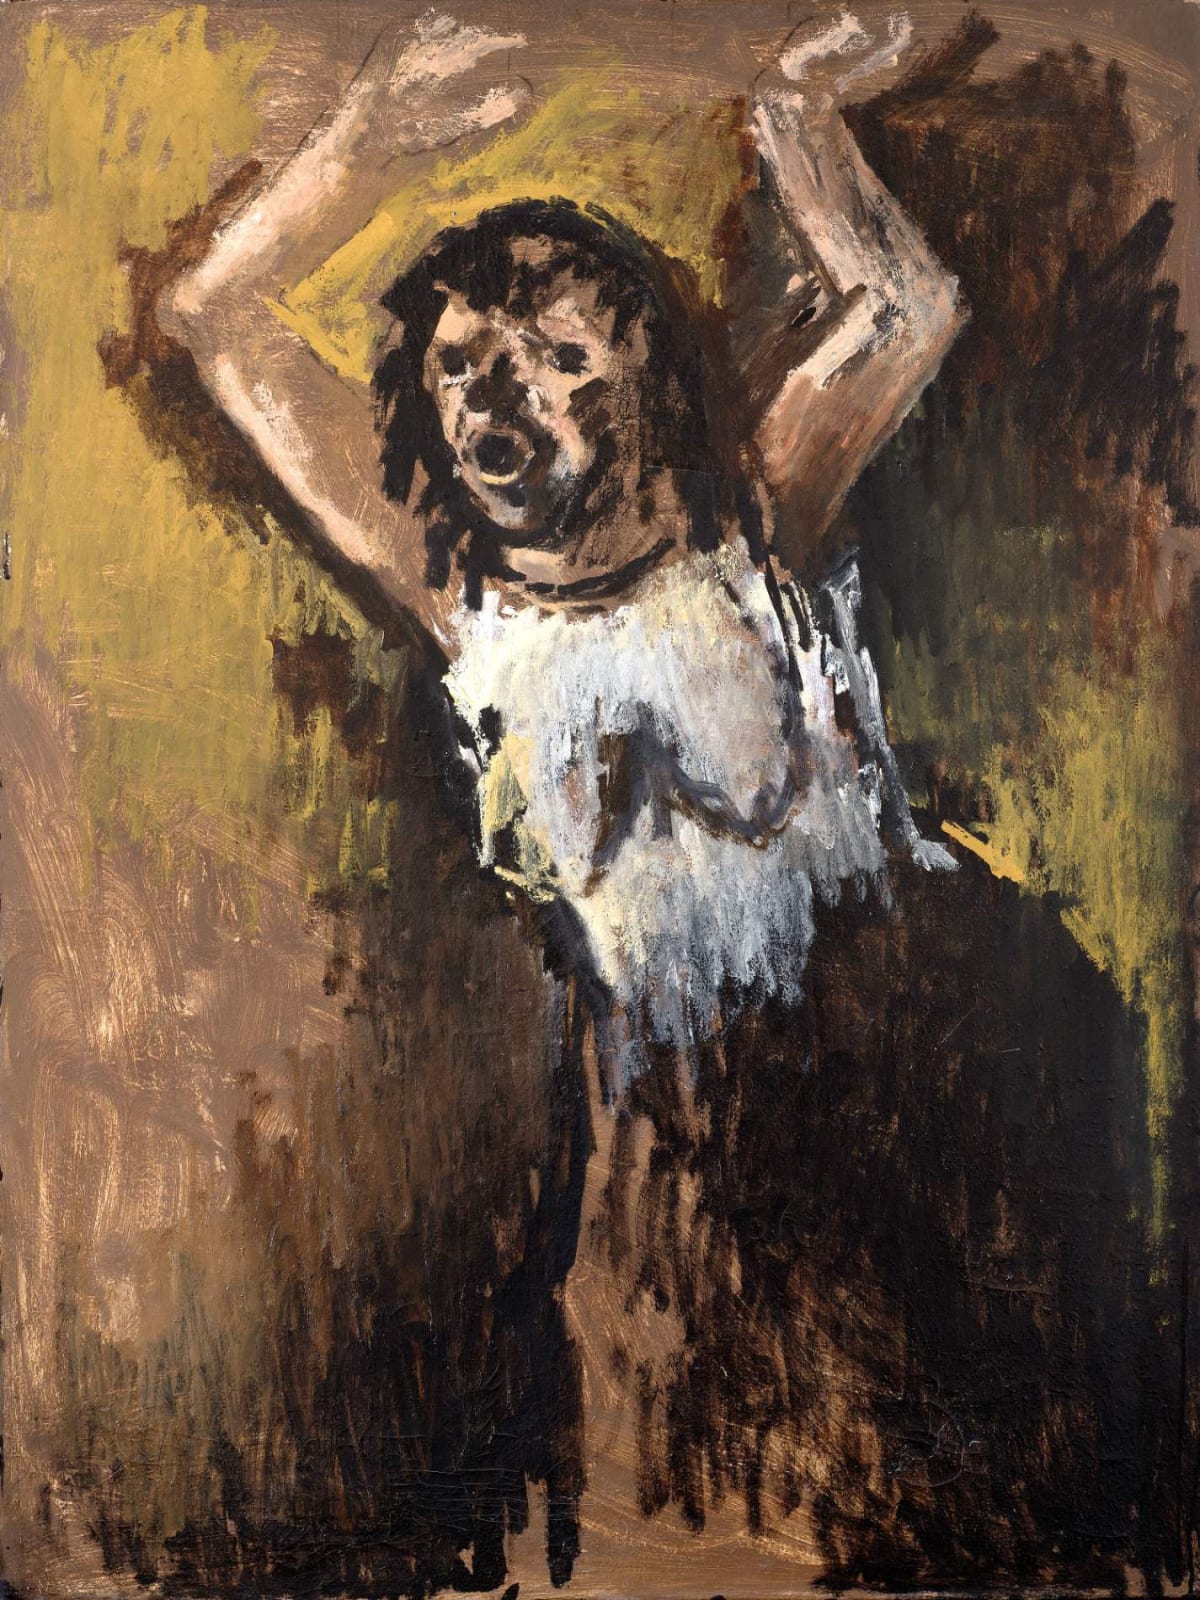 Josef Herman (1911-2000) Tribute to Goya's Black Pictures (In Memory for the Fighters of the Warsaw Ghetto) 1974 (reworked 1998) Oil on canvas 119.38 x 91.4 cm Ben Uri Collection © Josef Herman estate To see and discover more about this artist click here